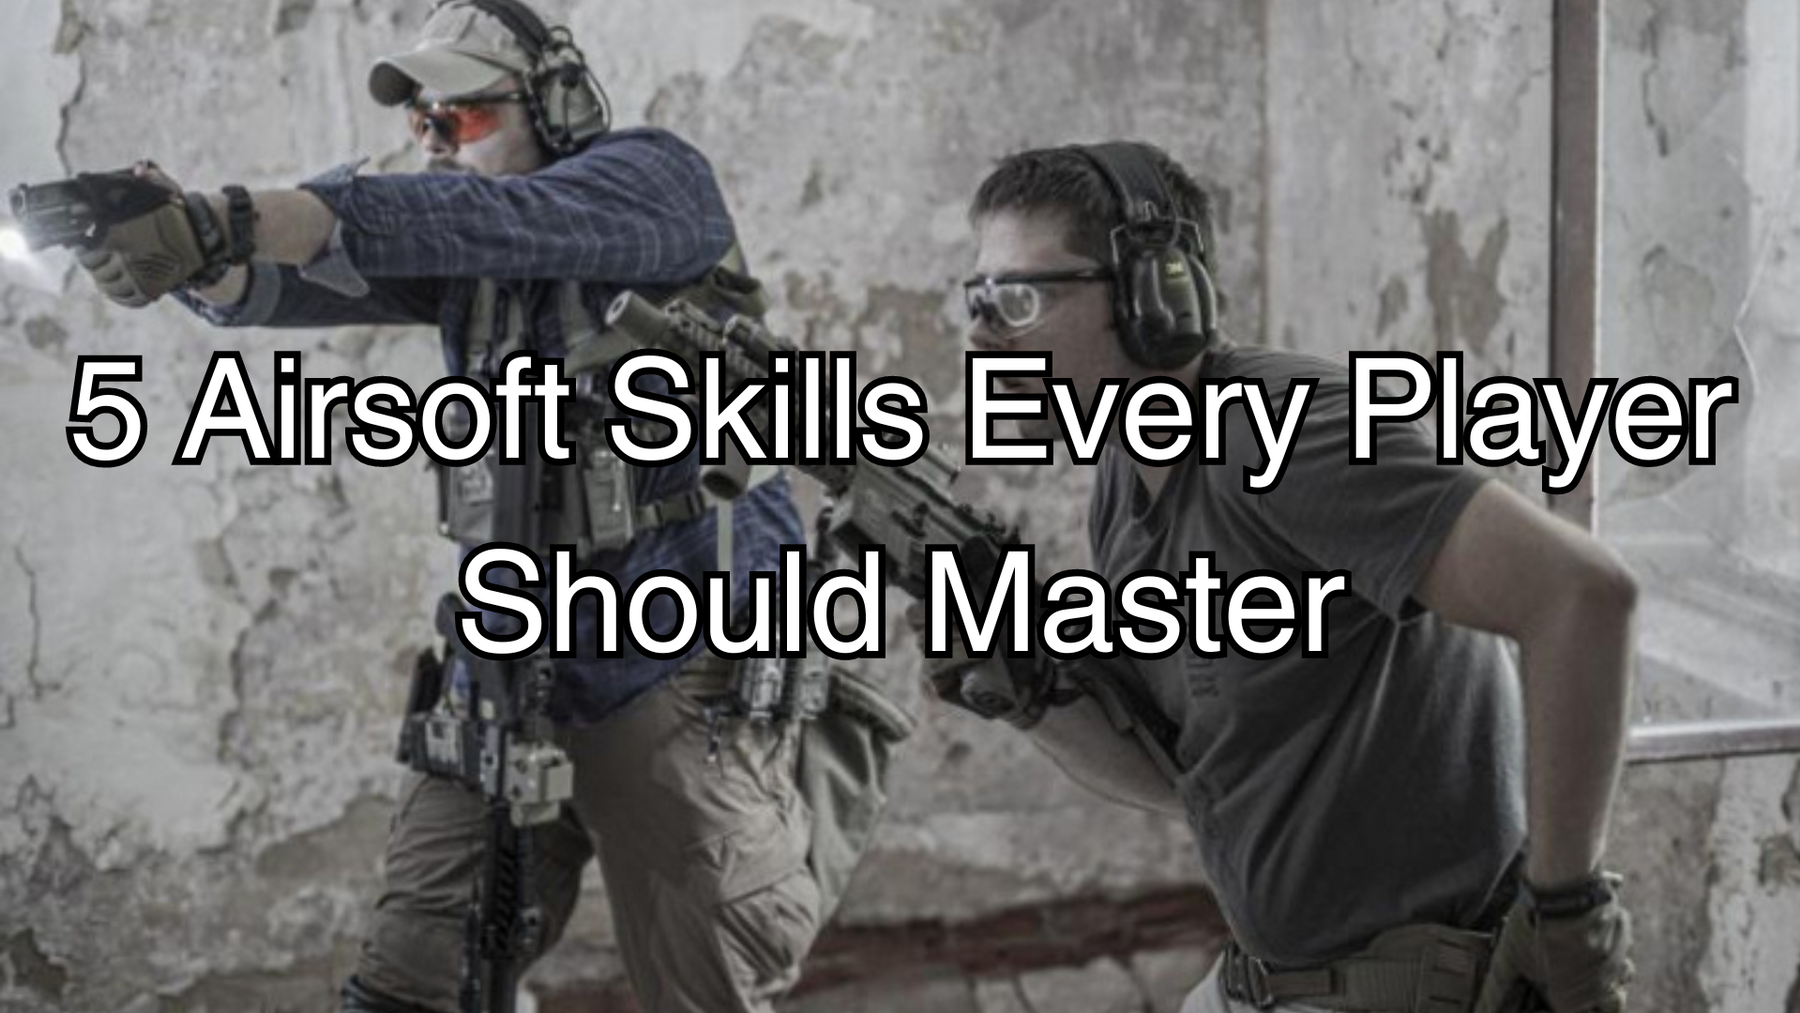 5 Airsoft Skills Every Player Should Master